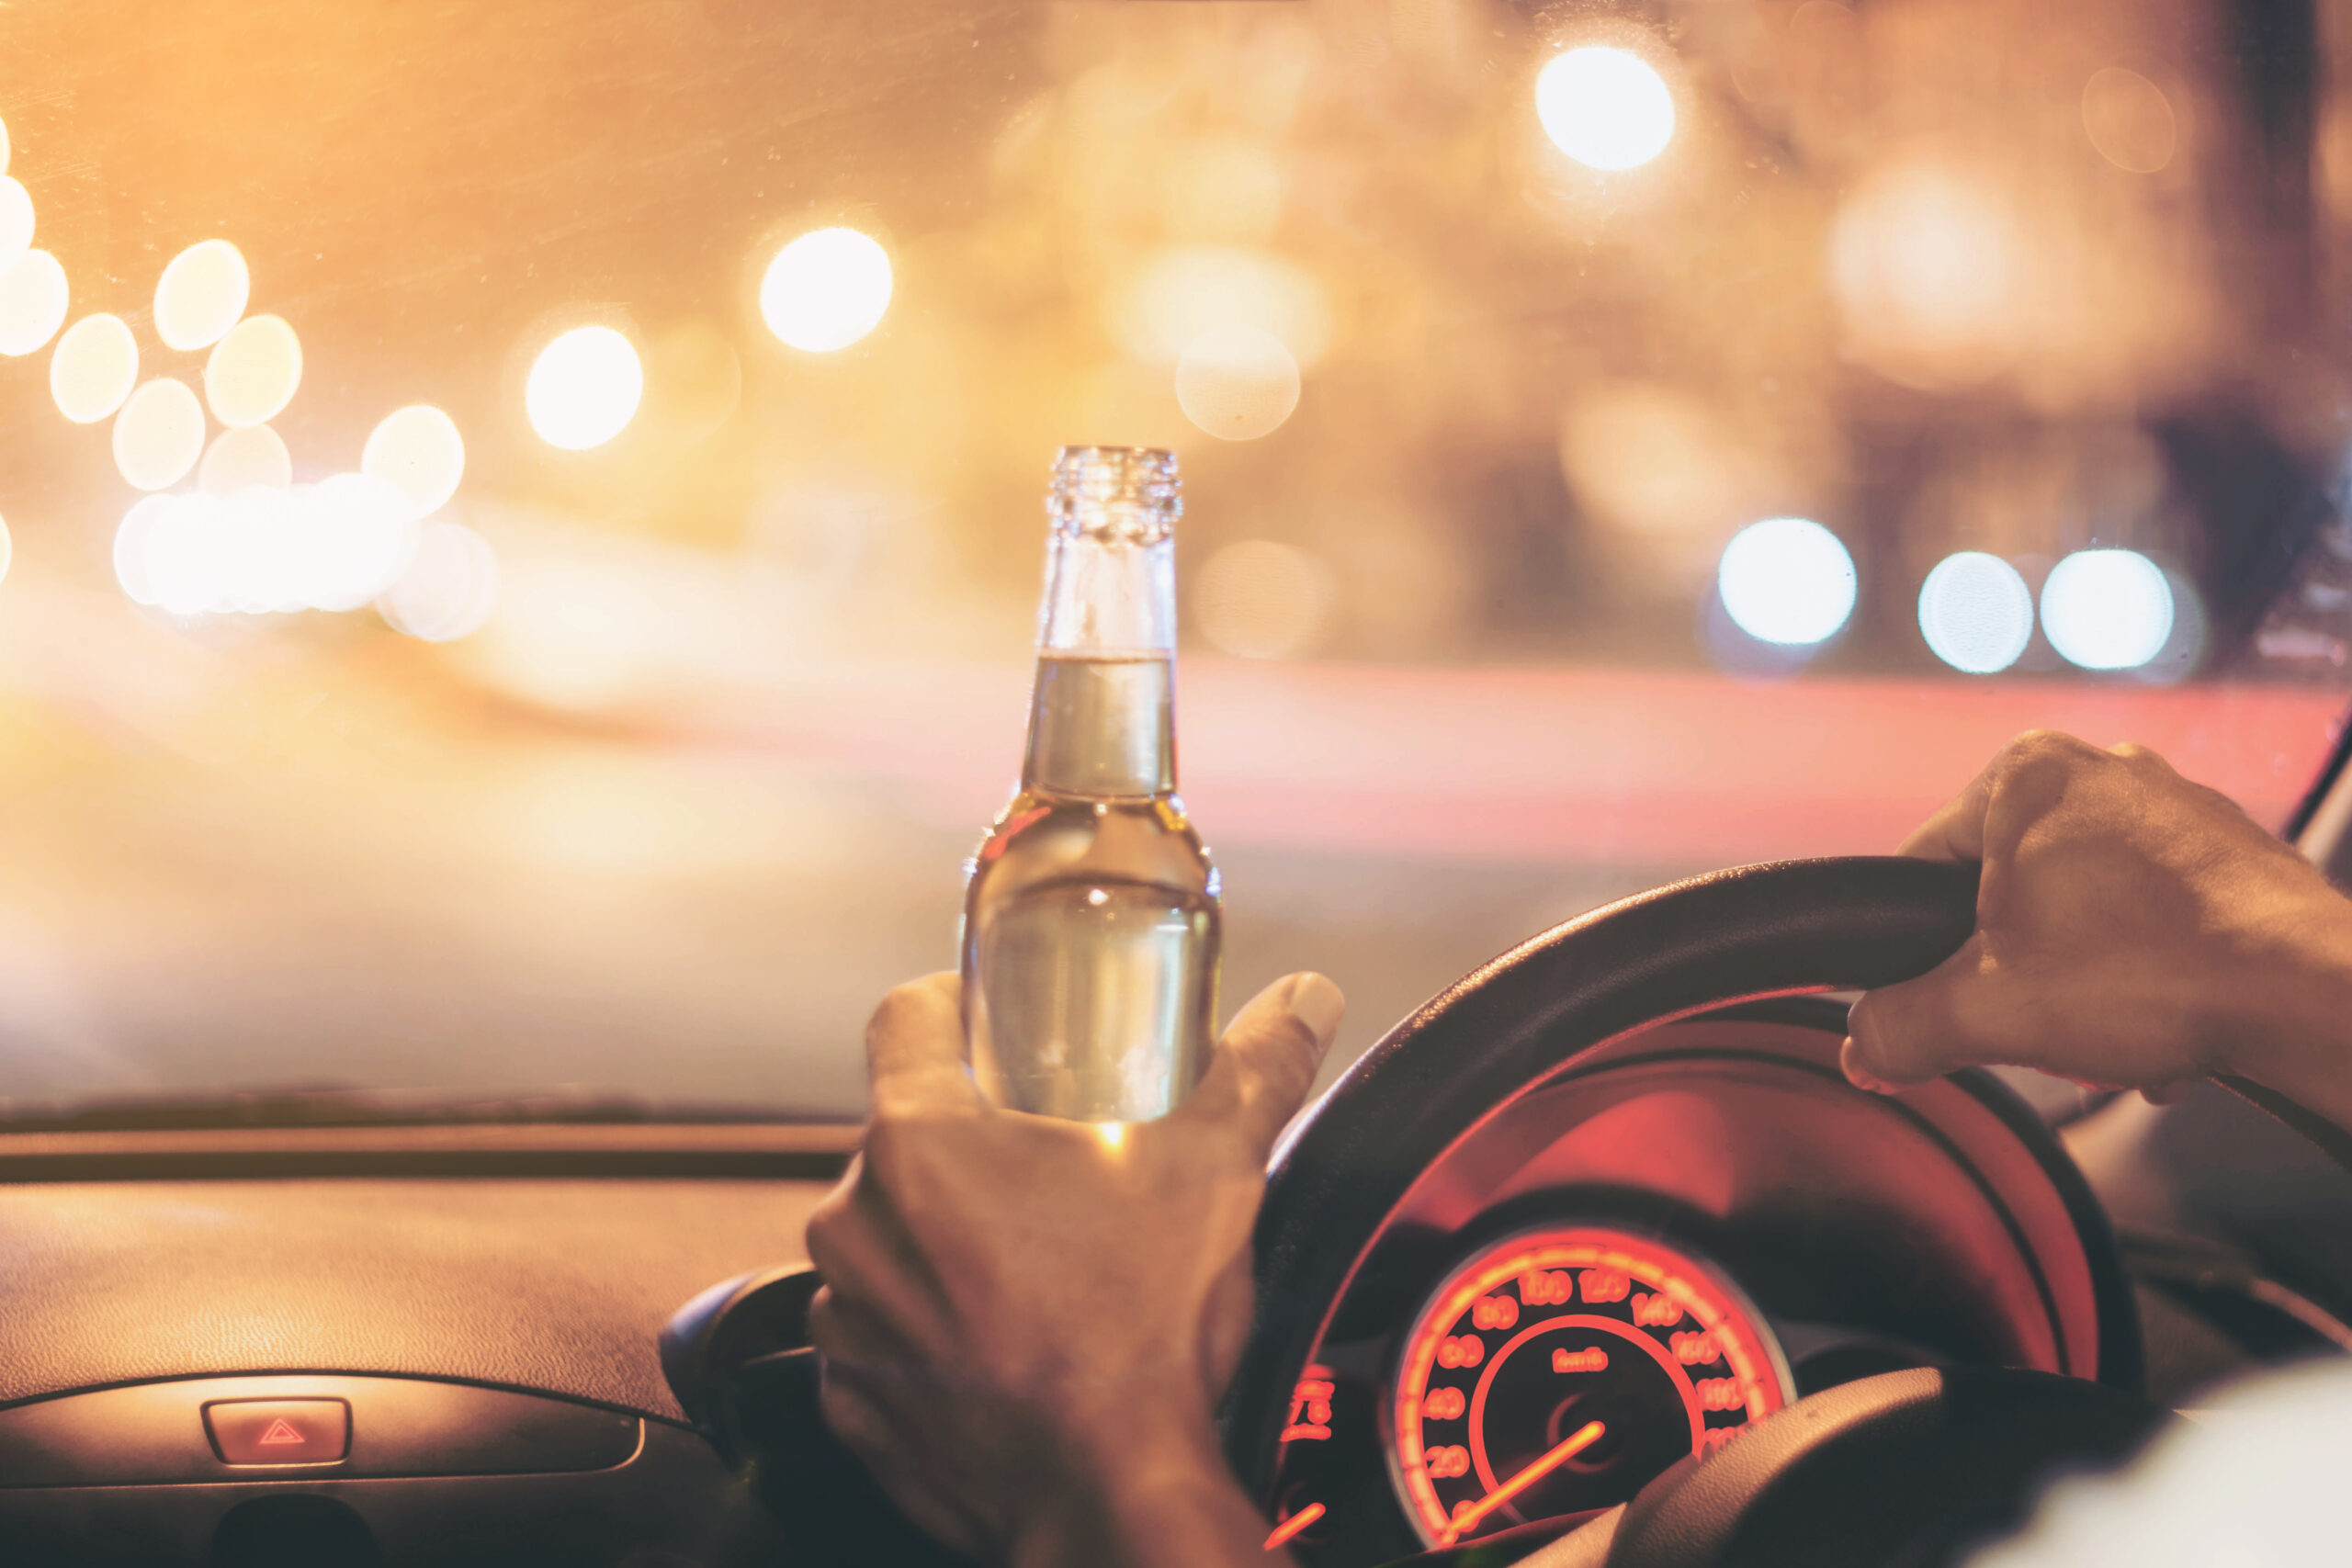 A drunk motorist is holding an open alcohol bottle while operating a car. The help of a Desoto DUI attorney is necessary to mitigate legal consequences.